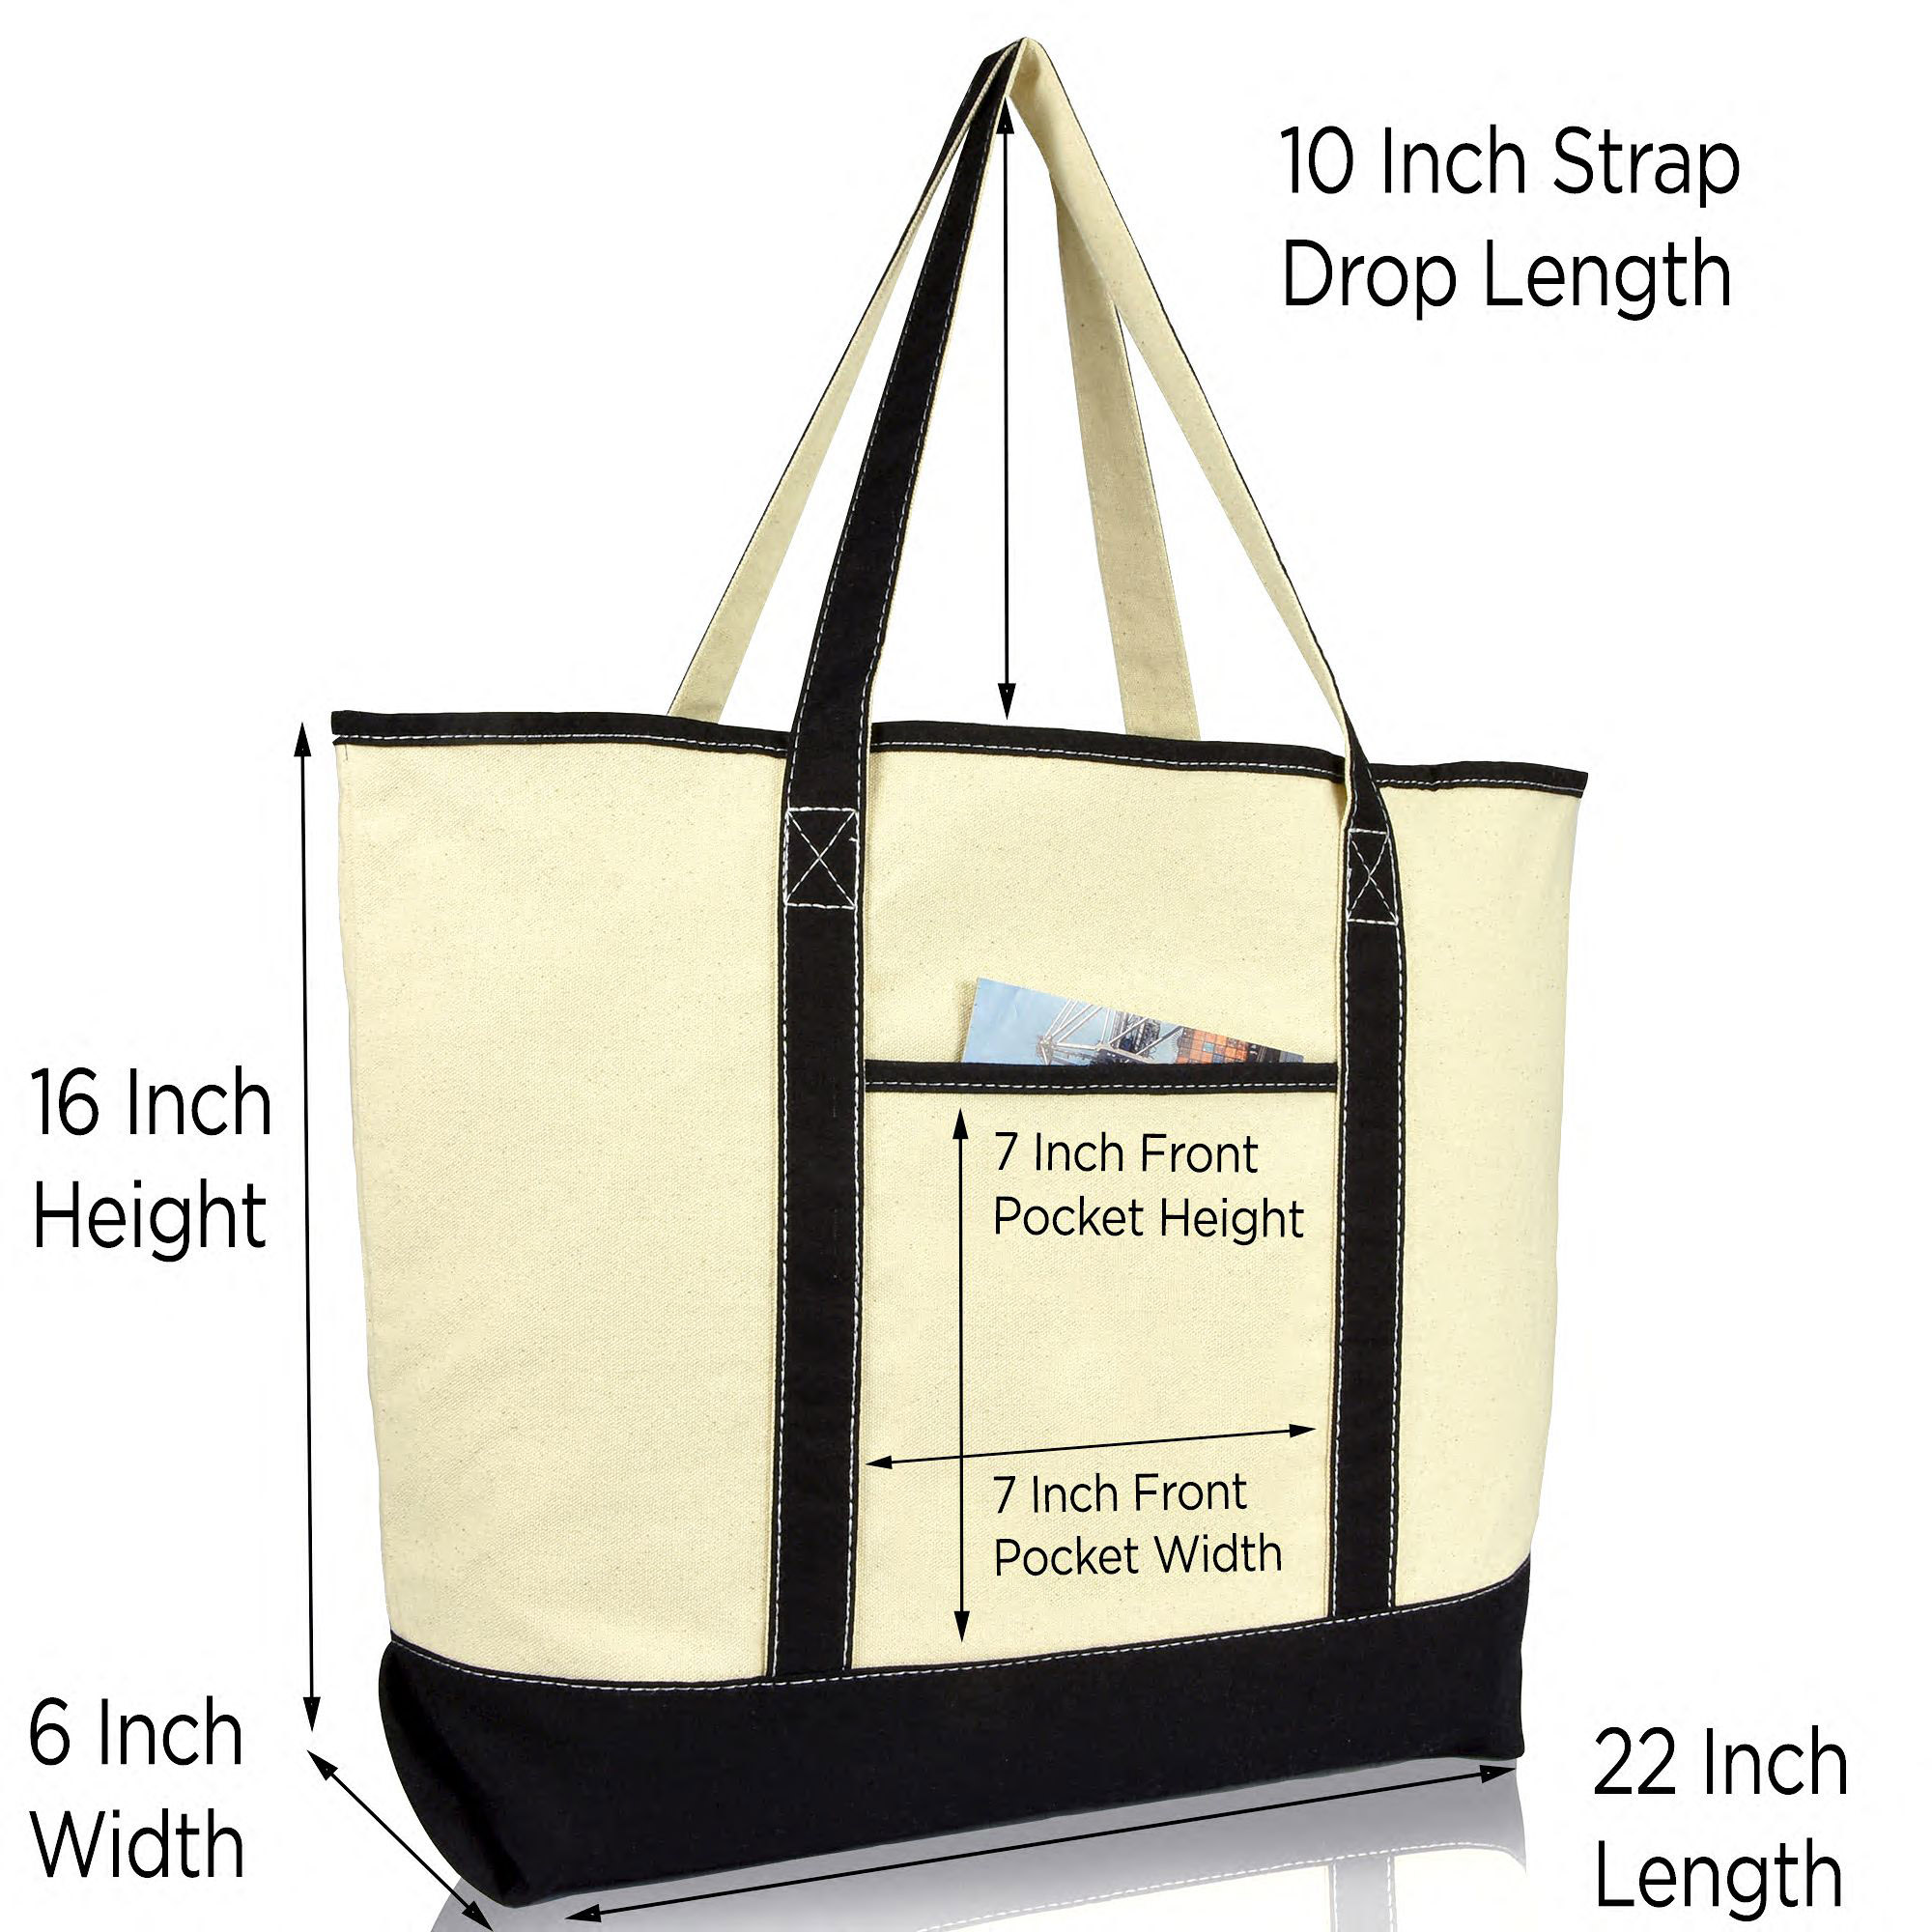 DALIX 22" Open Top Deluxe Tote Bag with Outer Pocket in Black - image 4 of 5